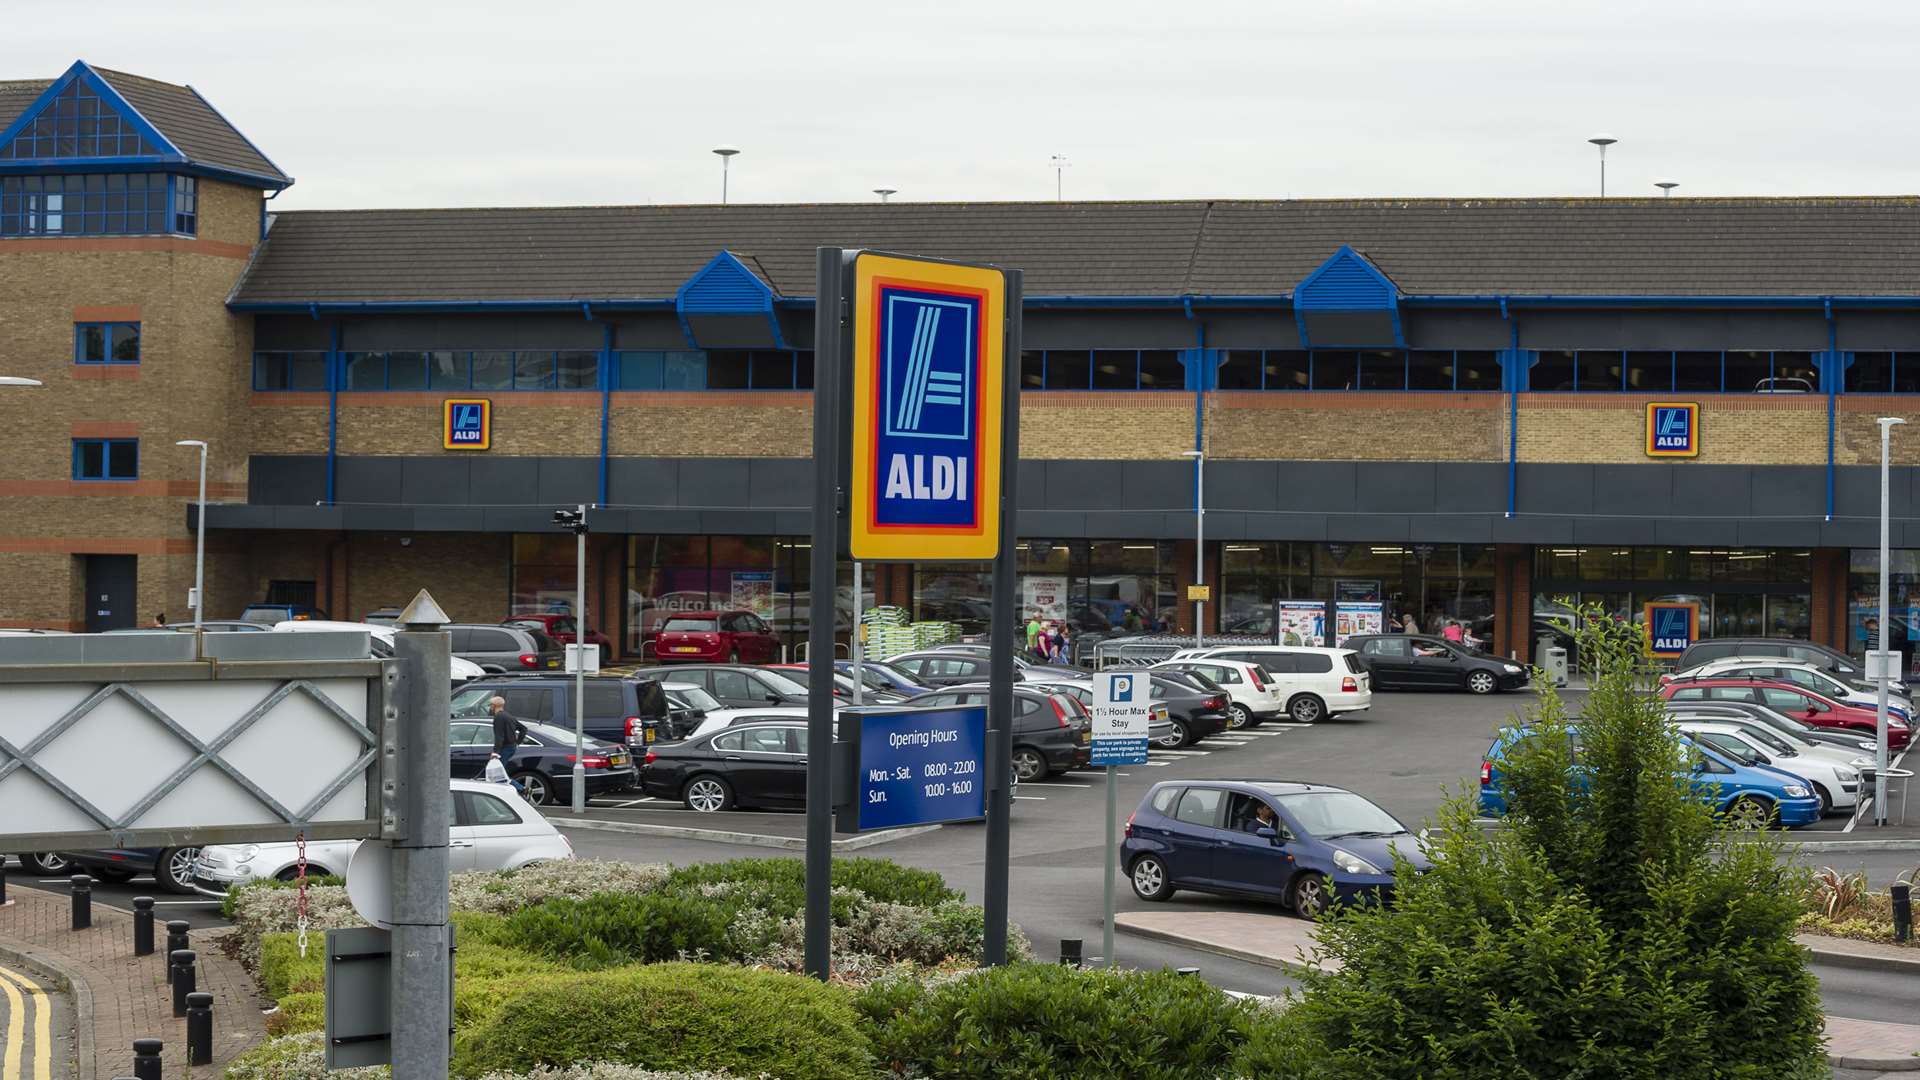 The gym will open above the Aldi supermarket on the old Waitrose site